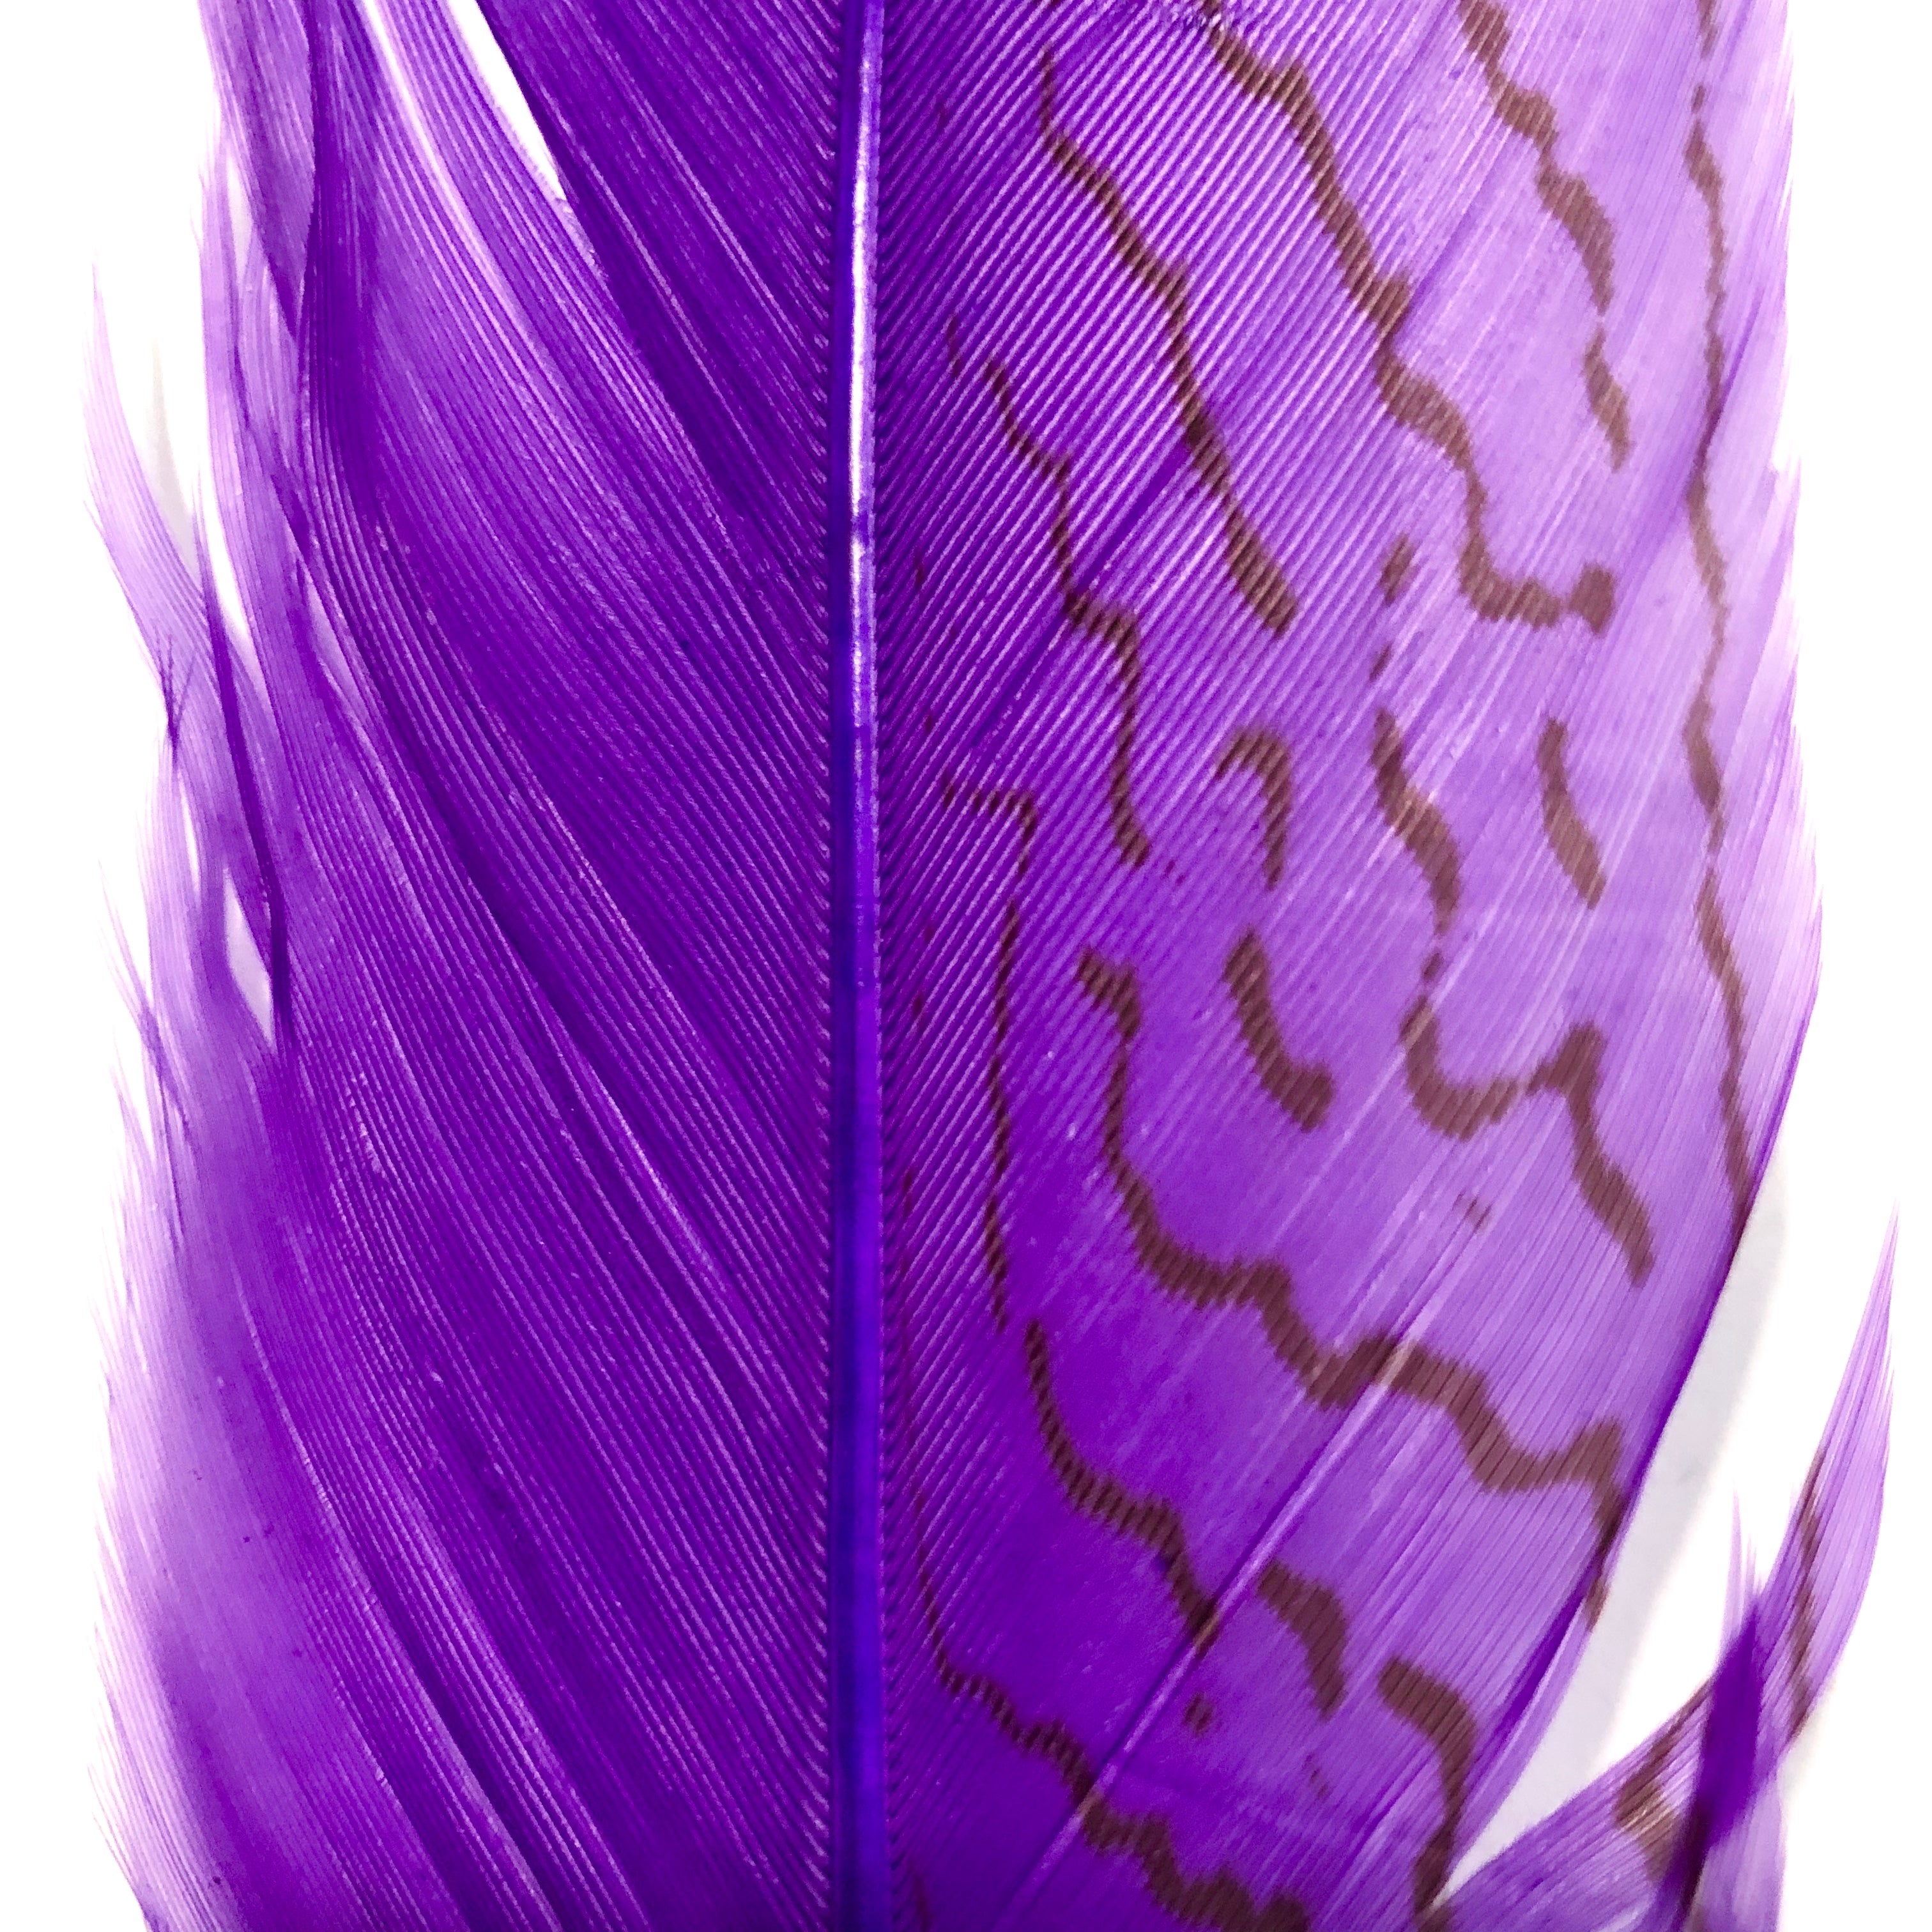 20" to 30" Silver Pheasant Tail Feather - Purple